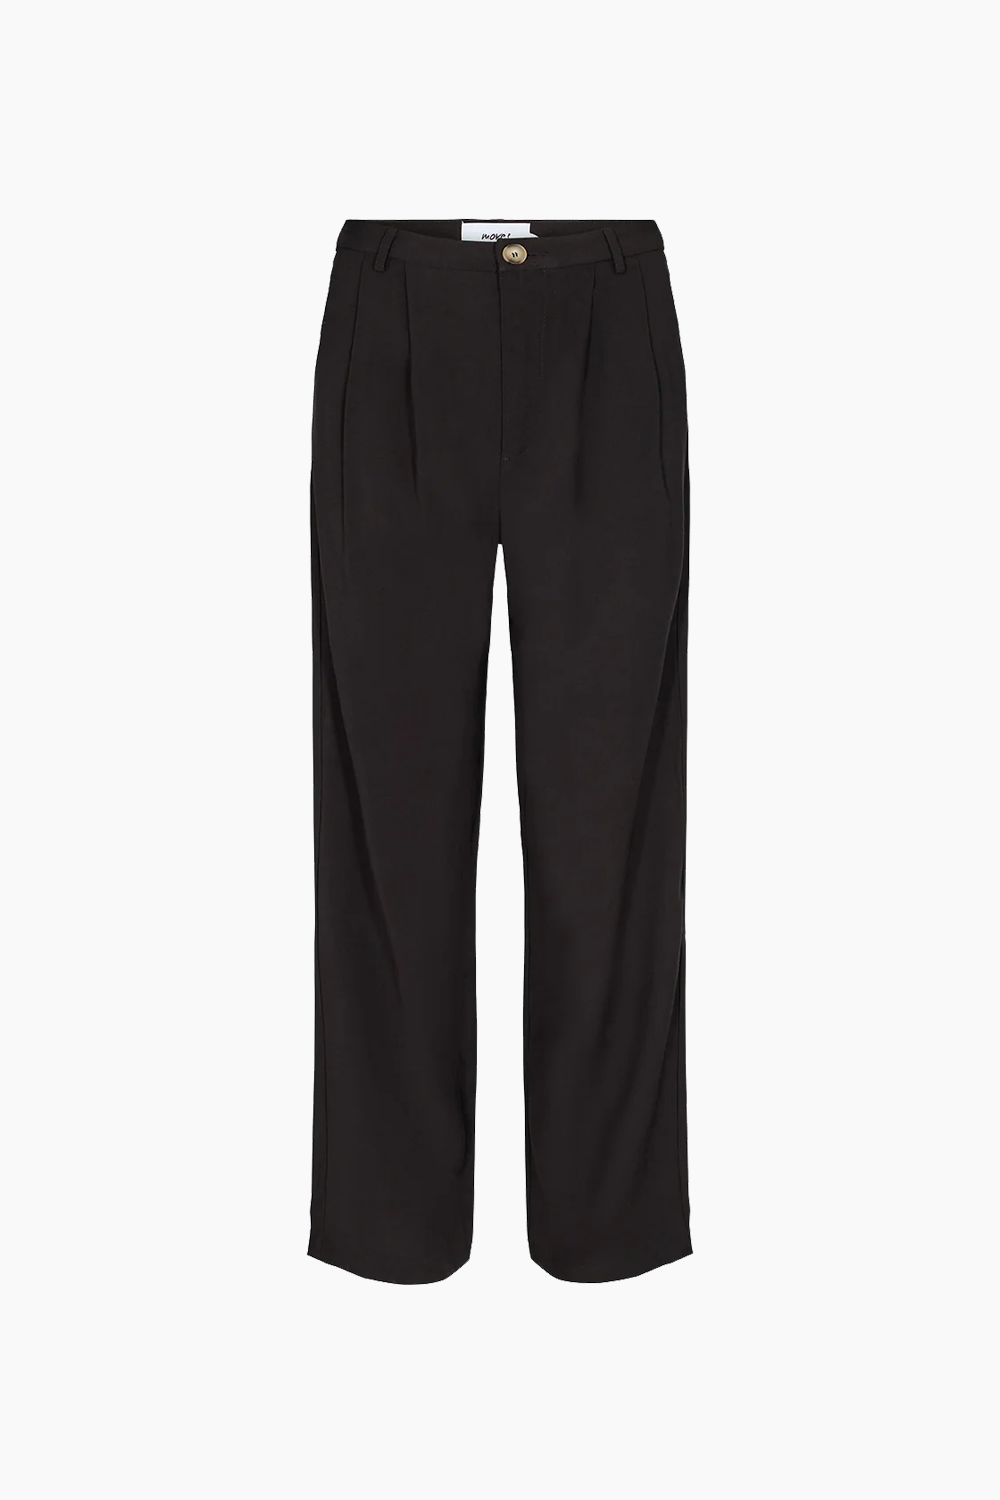 Nimma Trousers - Black - Moves